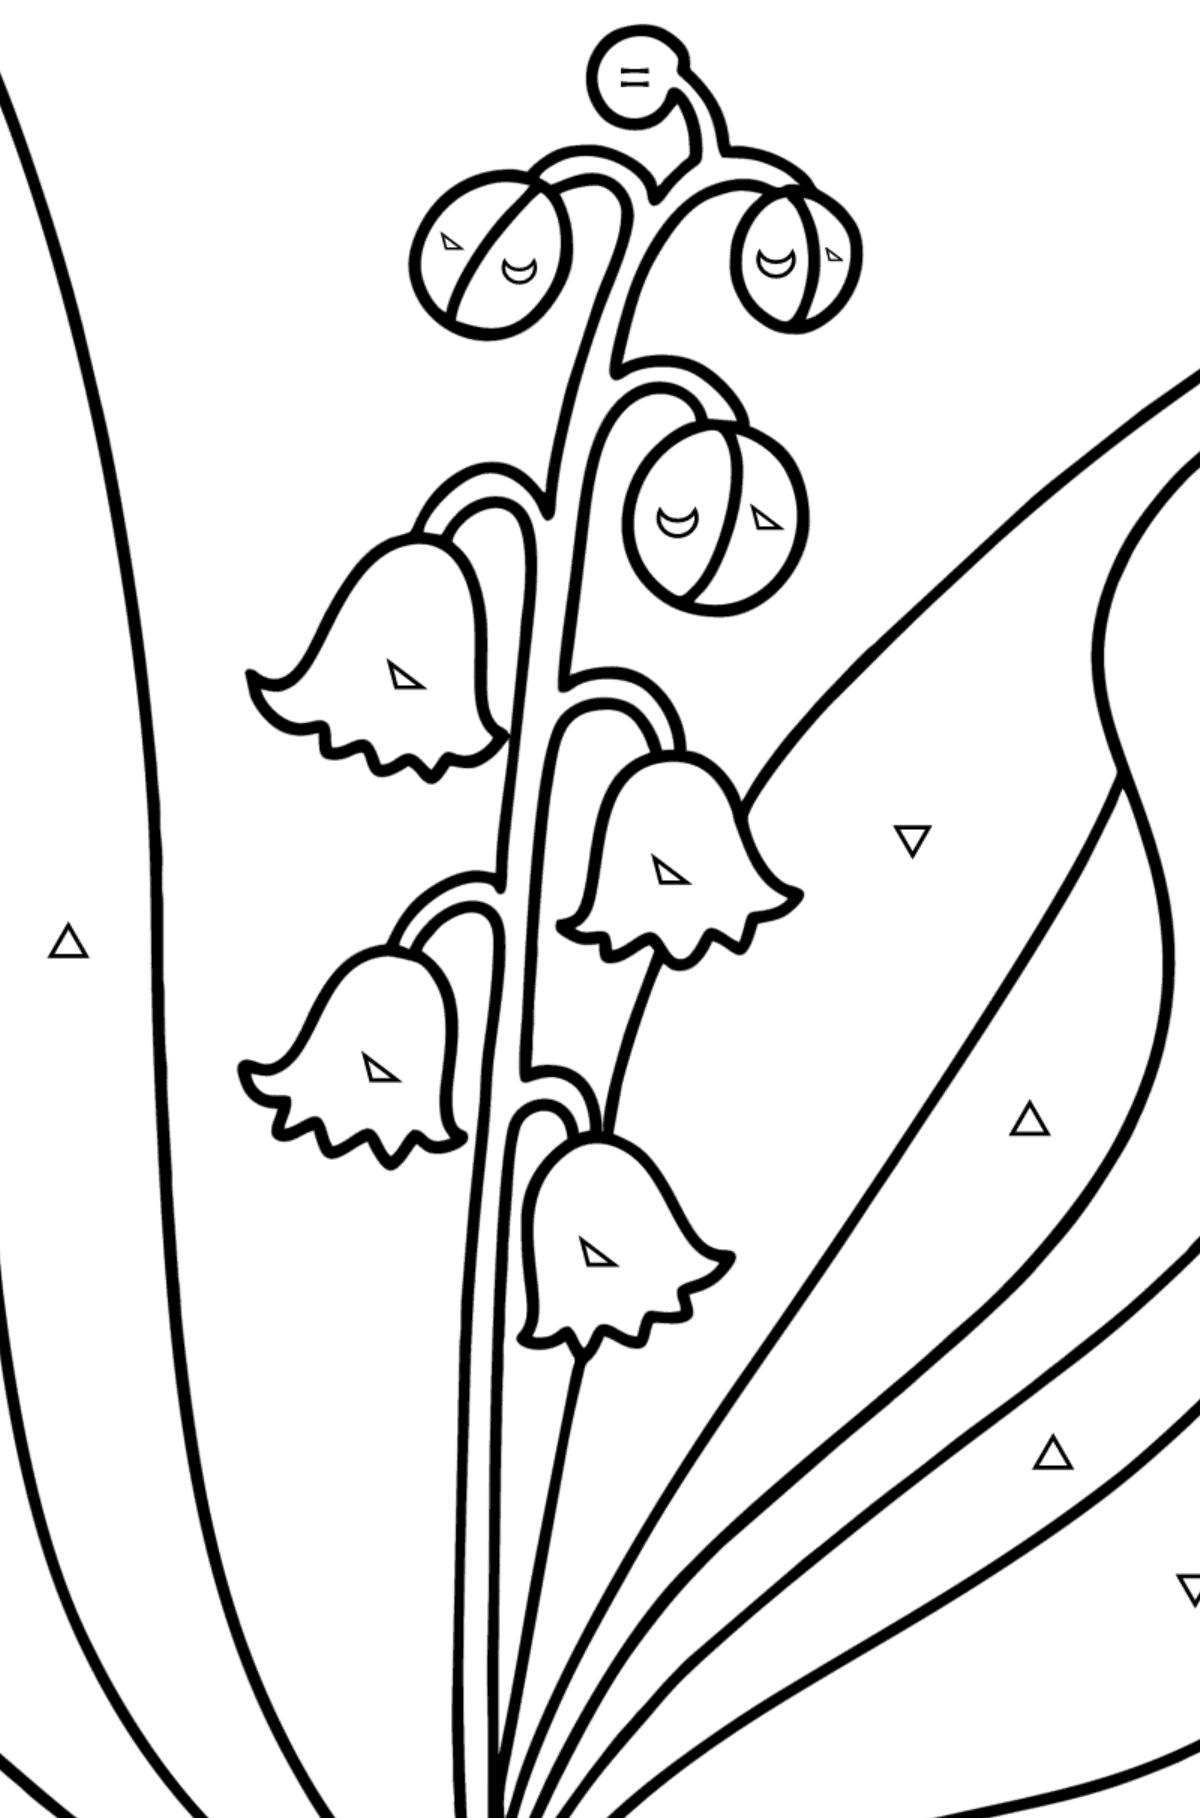 Lily of valley coloring page - Coloring by Symbols and Geometric Shapes for Kids